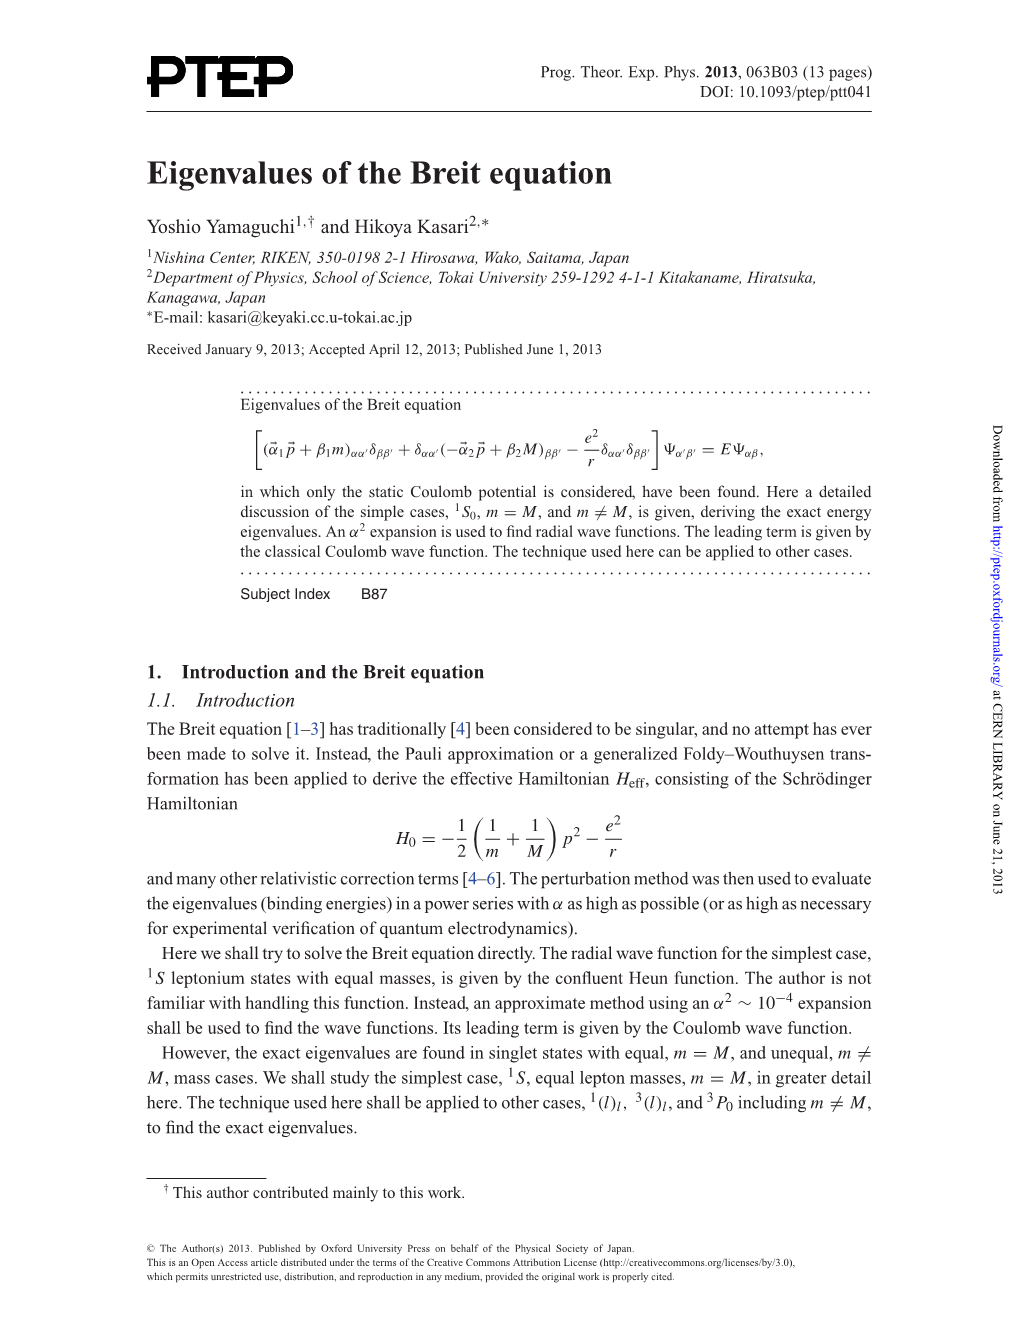 Eigenvalues of the Breit Equation